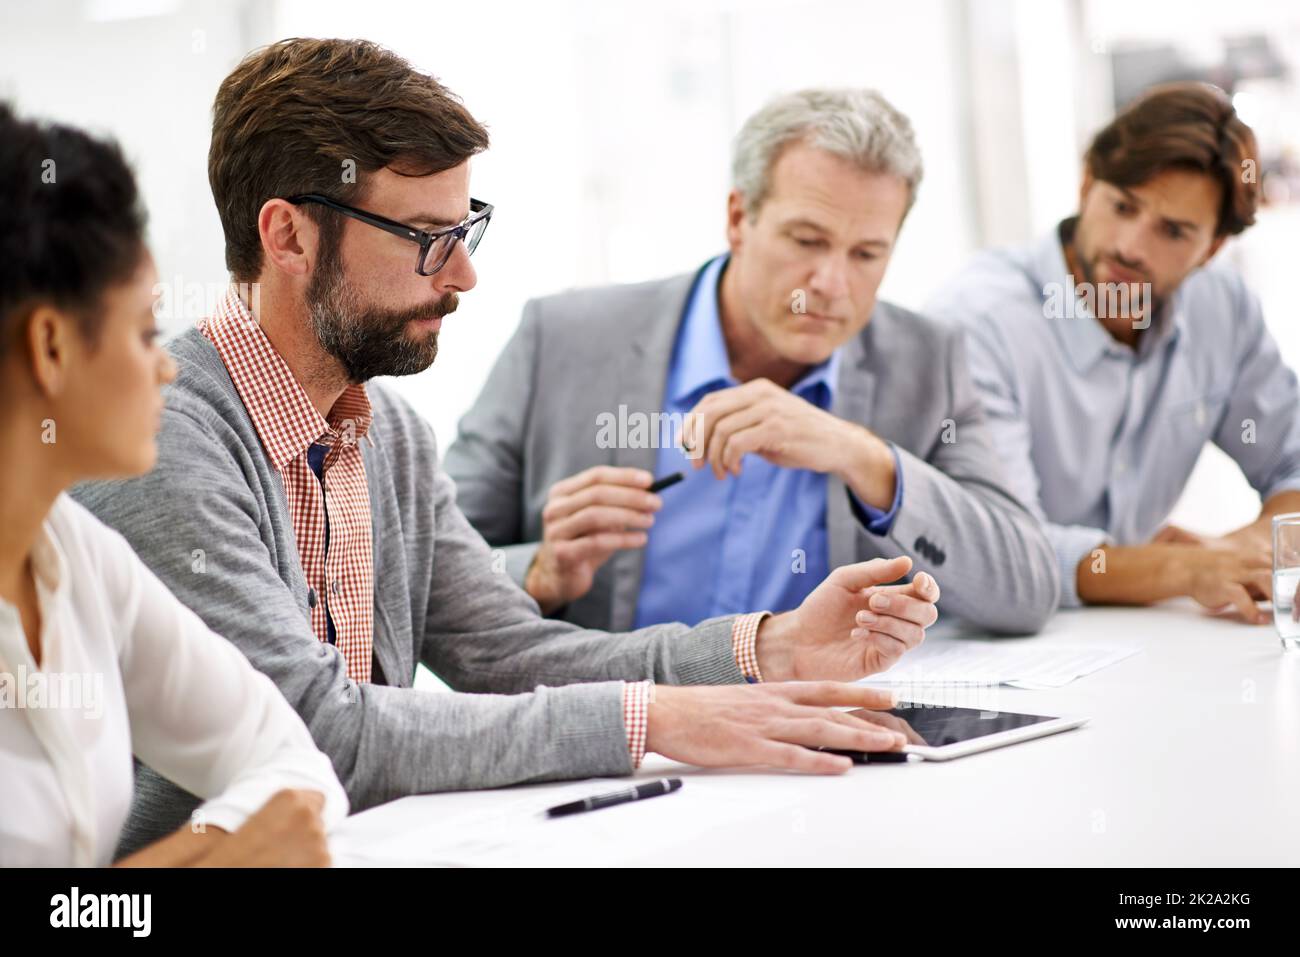 Hard working office pros. Shot of a group of young professionals working at a desk in an office. Stock Photo